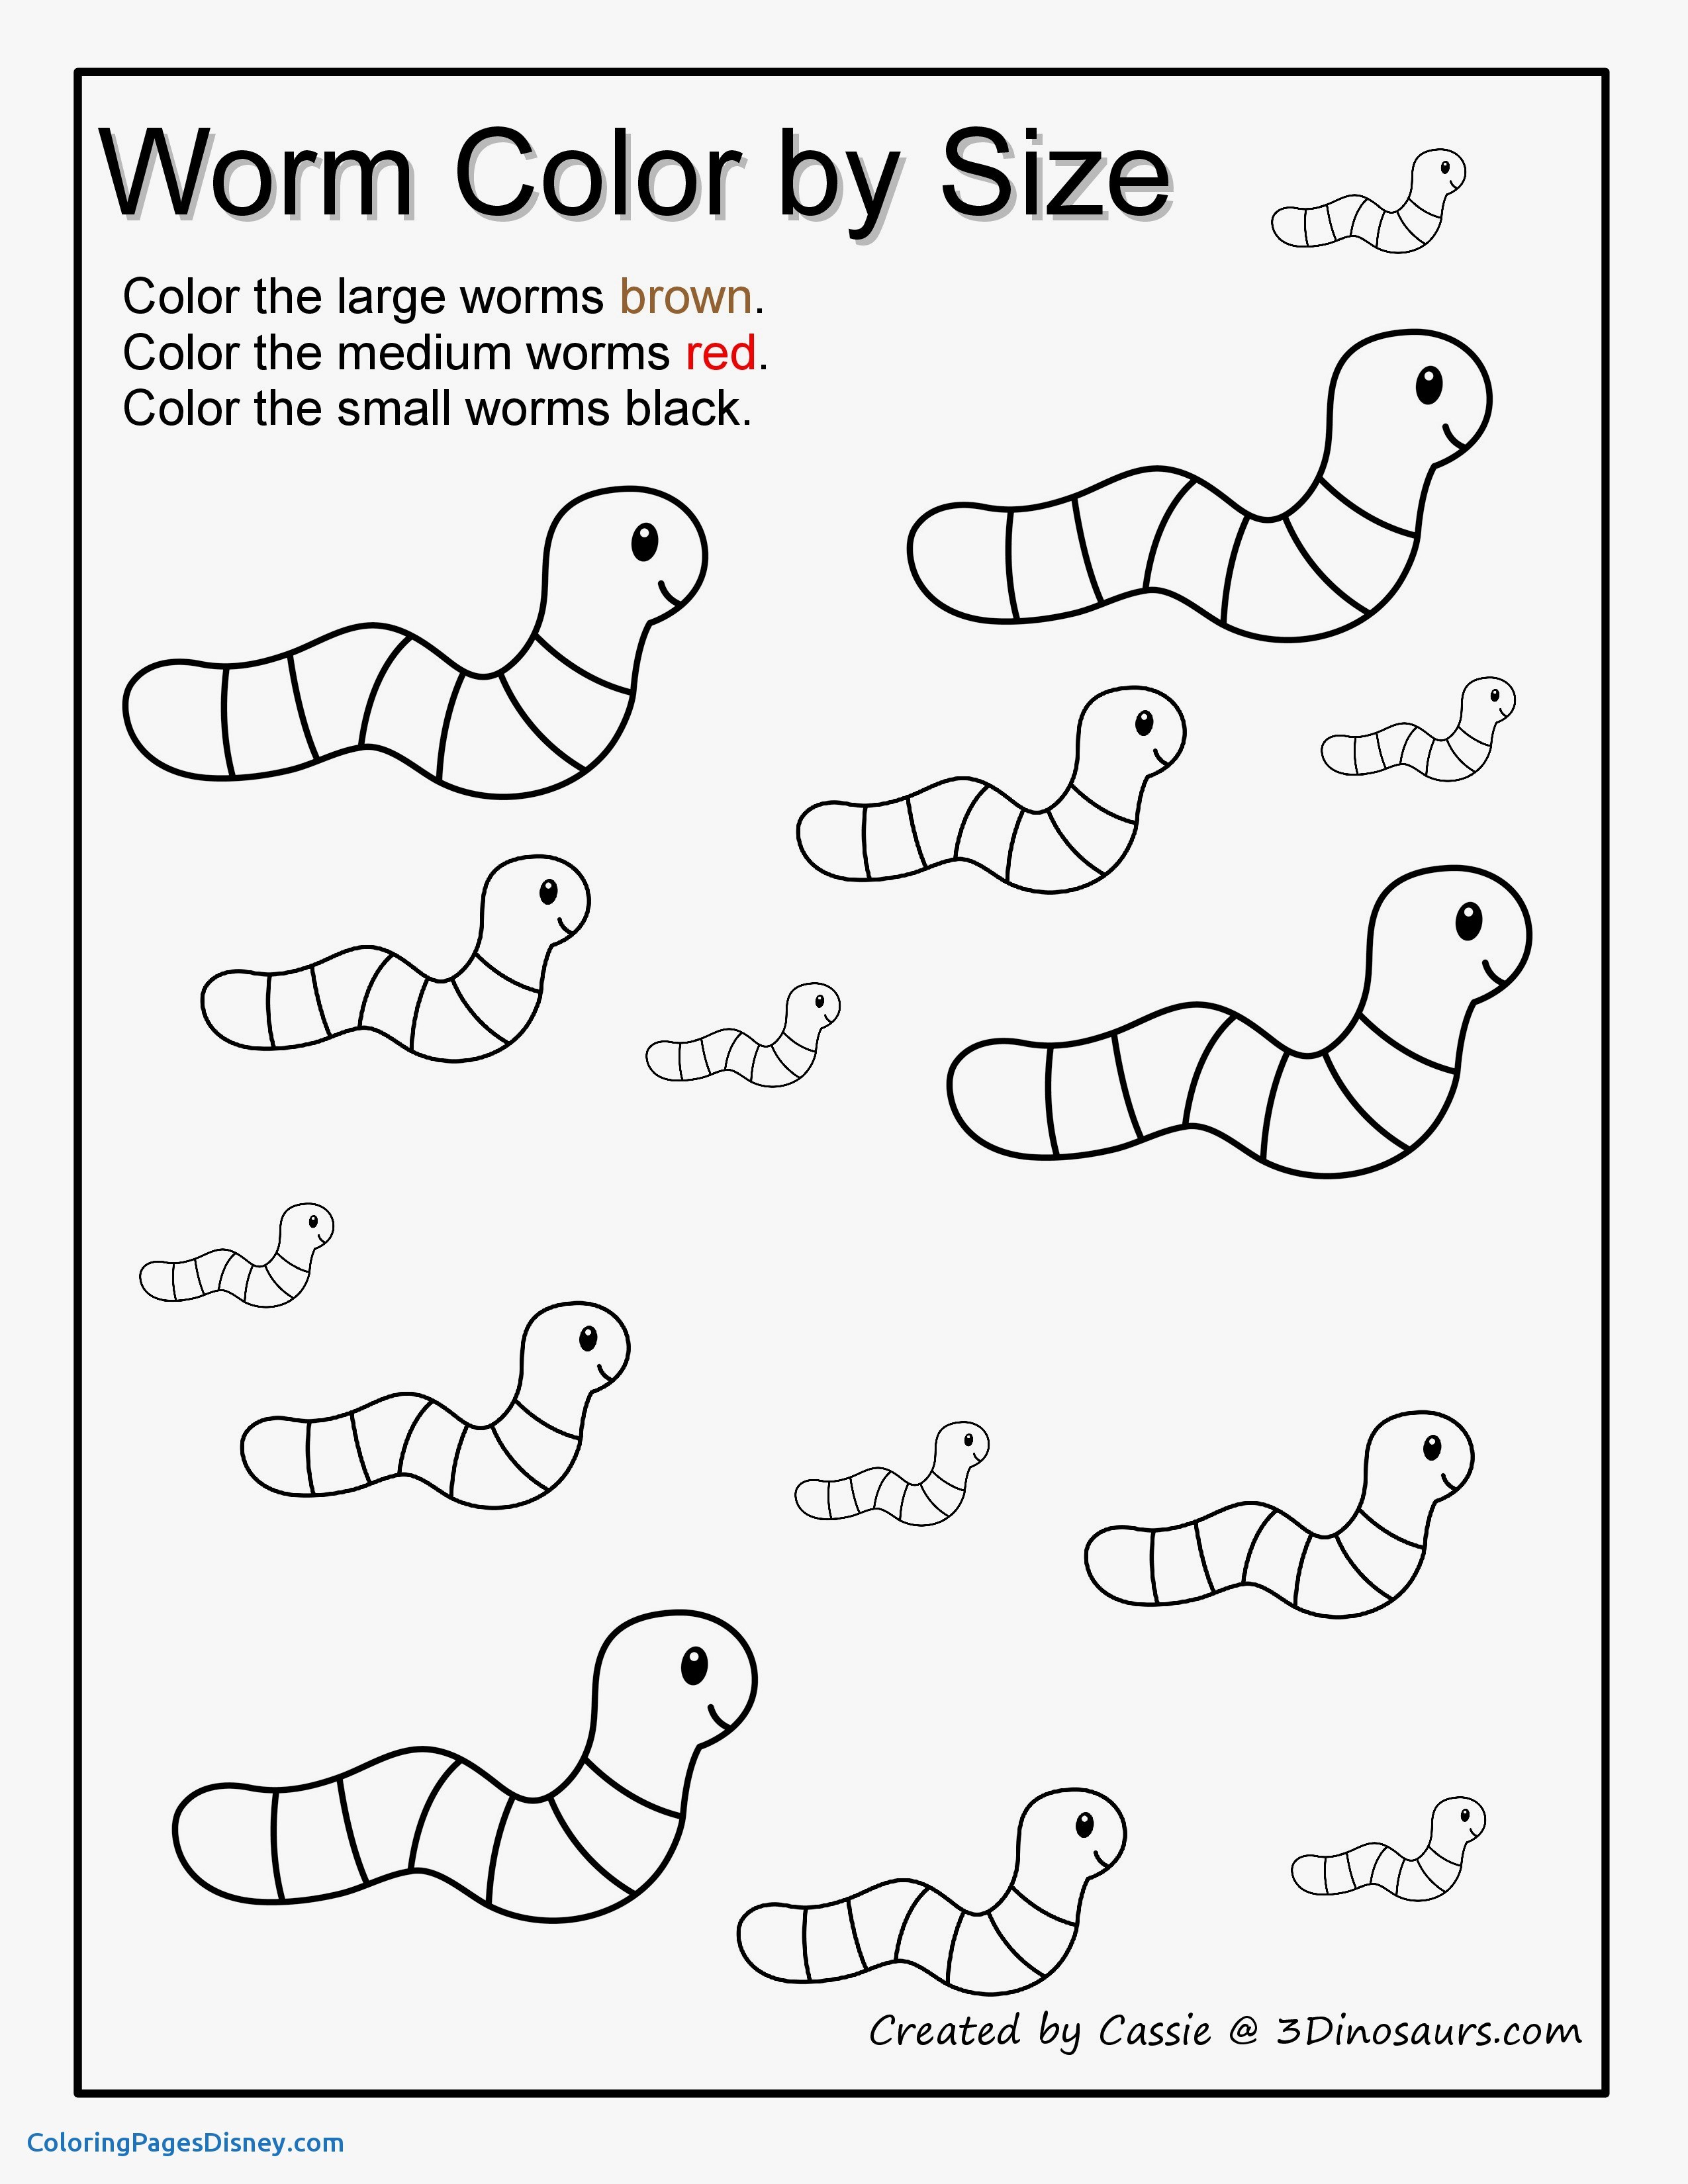 free-printable-worm-coloring-page